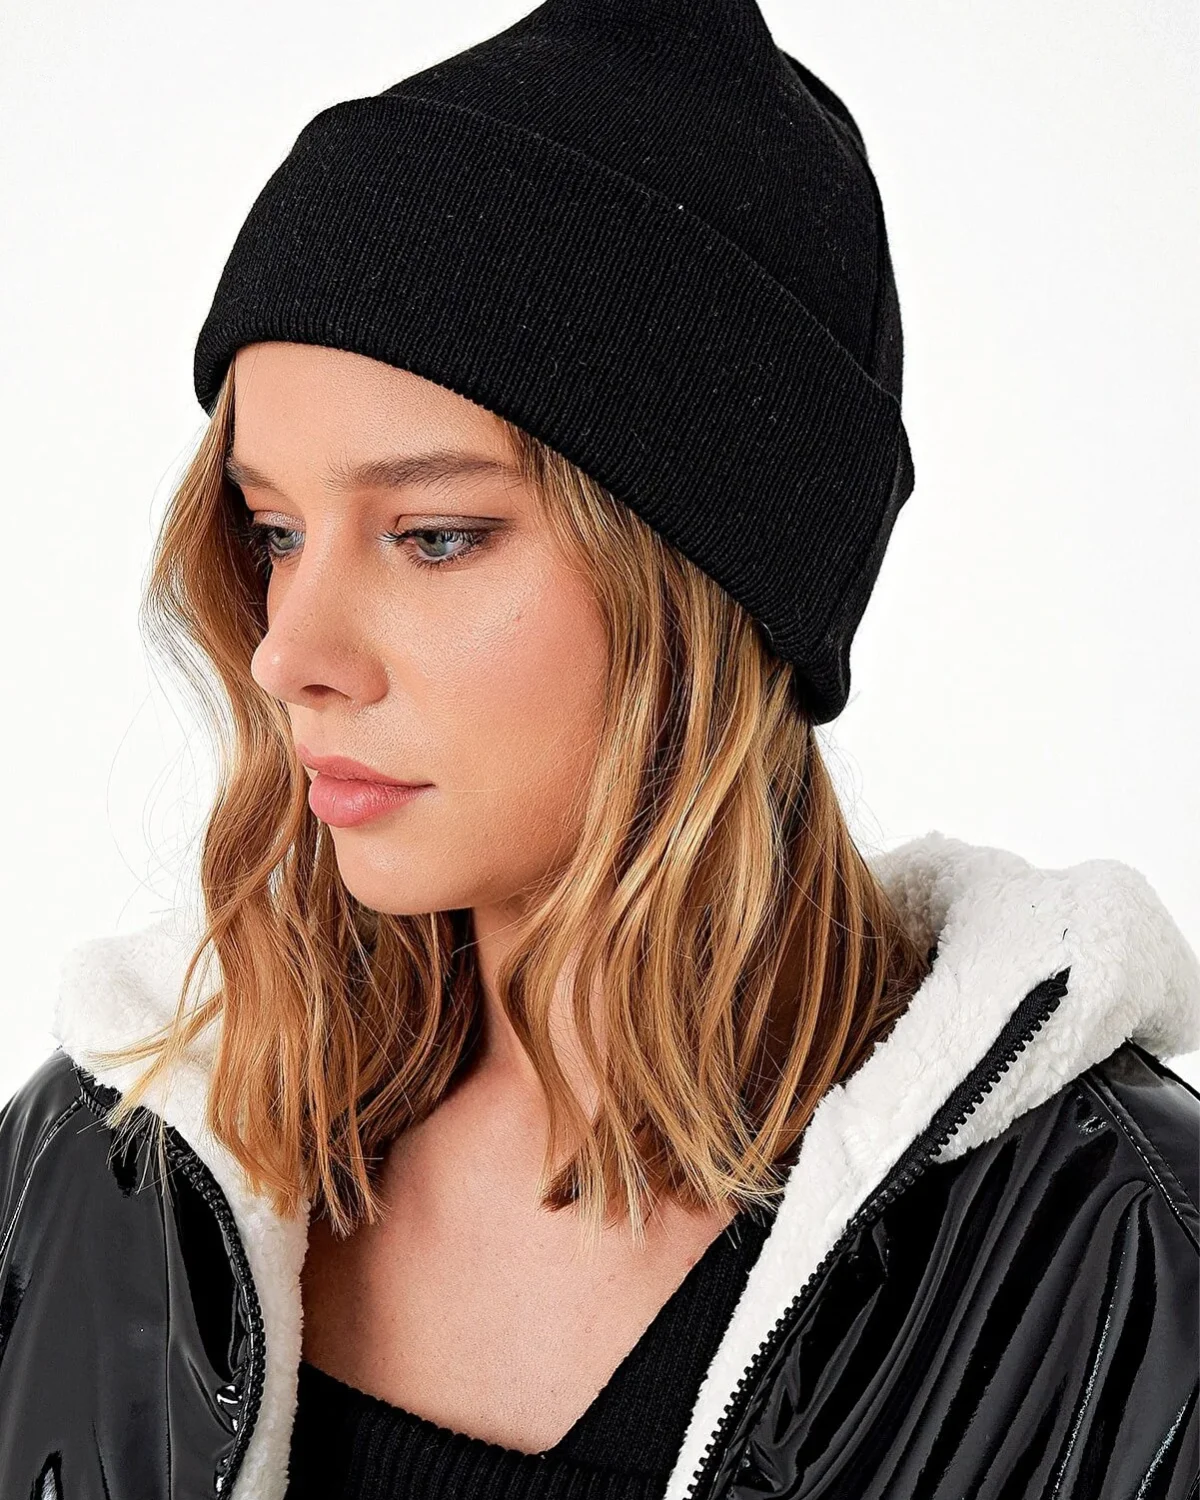 Xlacati Collection Black Beanie by Picks for Less